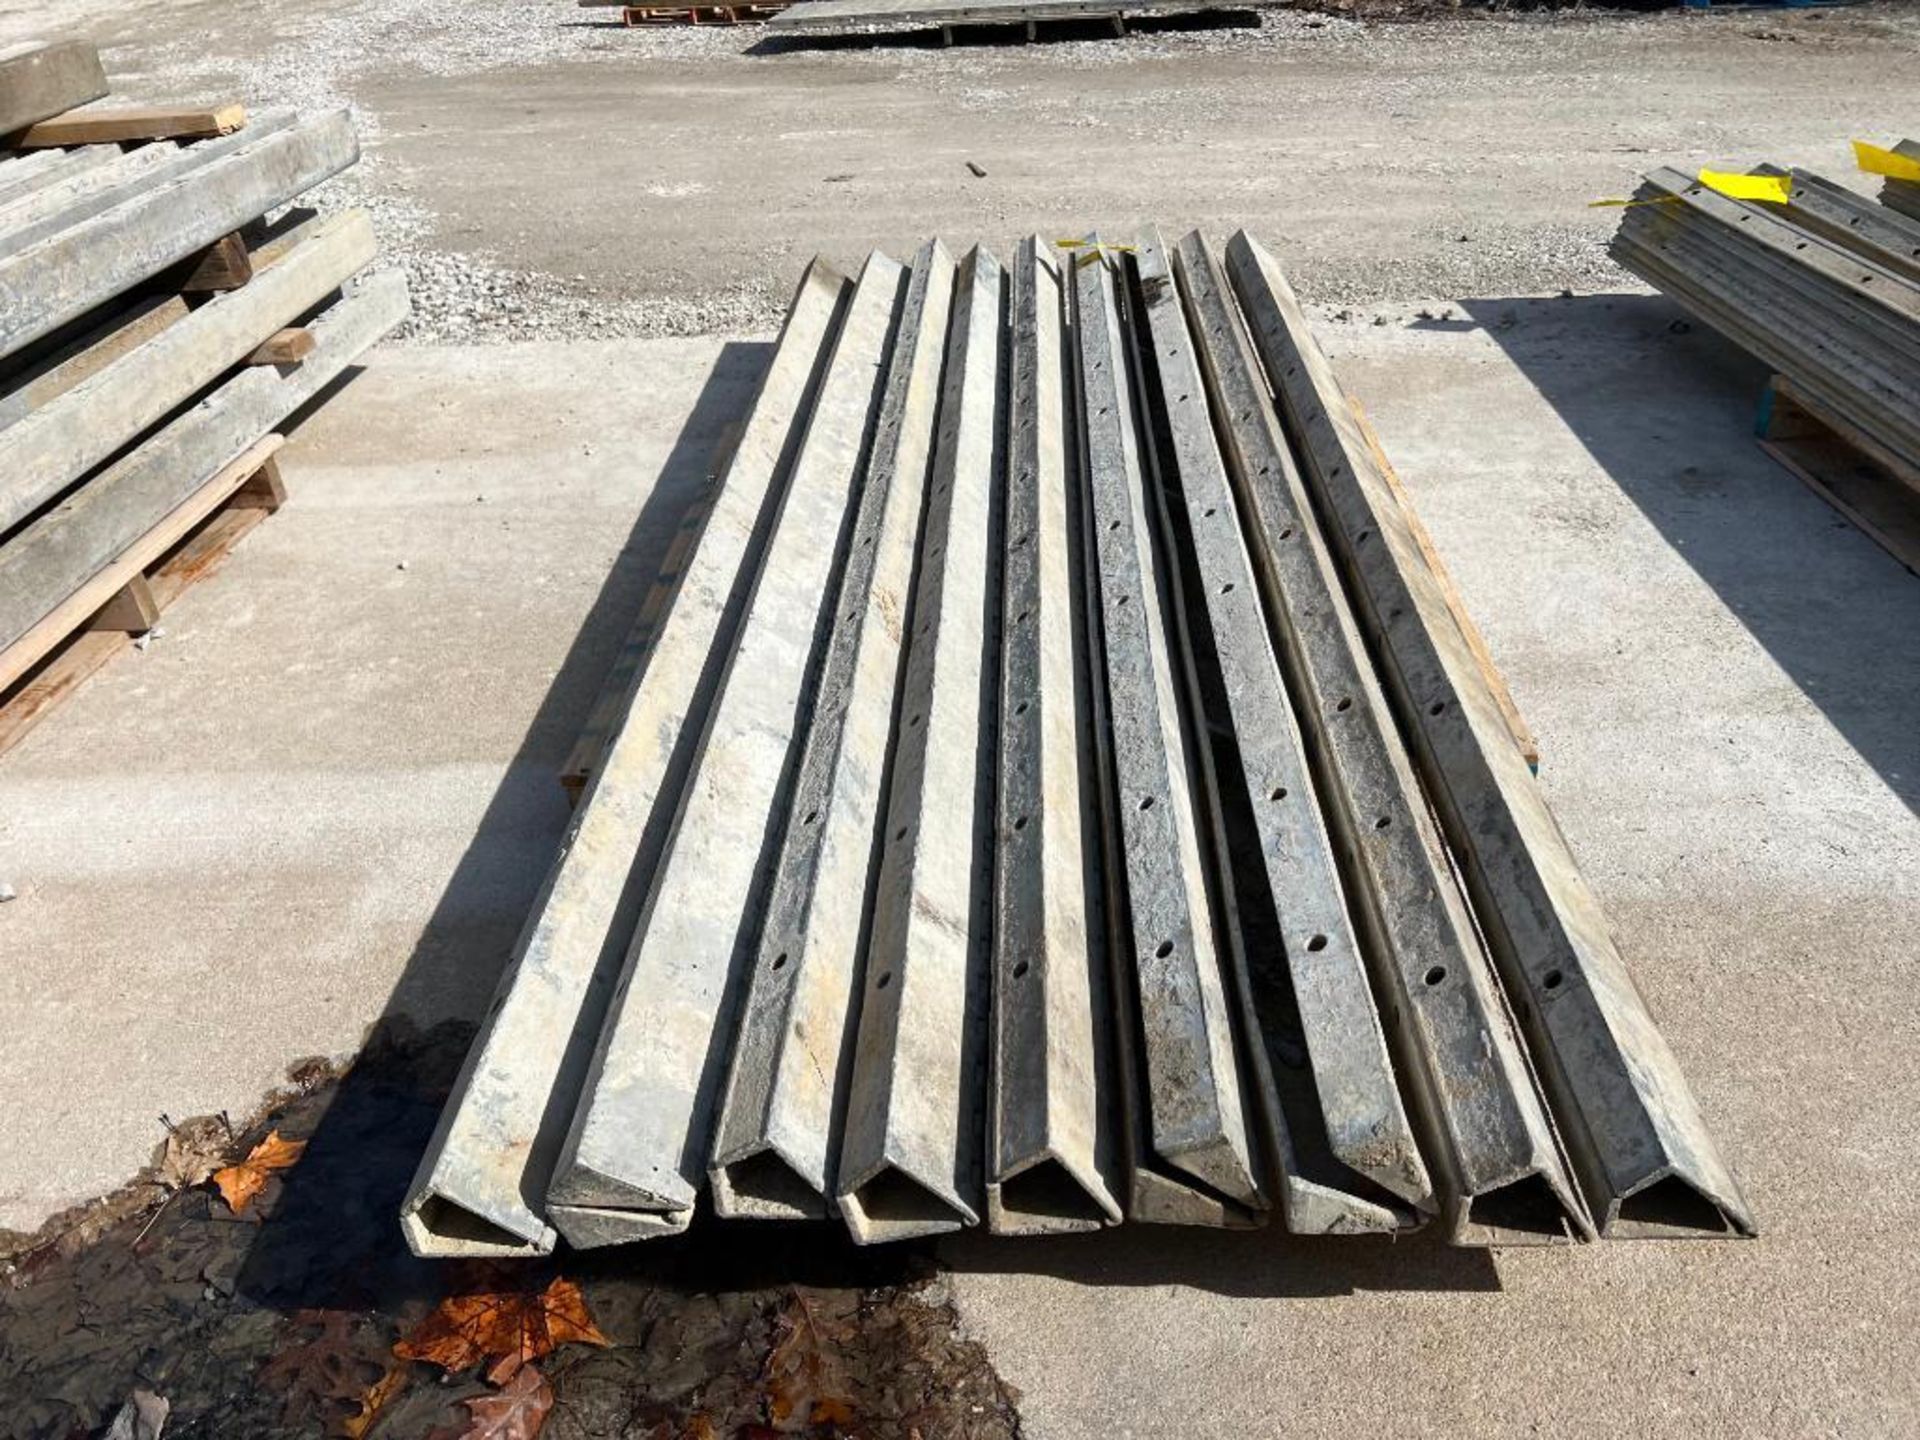 (9) 4" x 4" x8' Hinged Smooth Wall Ties Aluminum Concrete Forms, 8" Hole Pattern. Located in Mt. Ple - Image 2 of 2